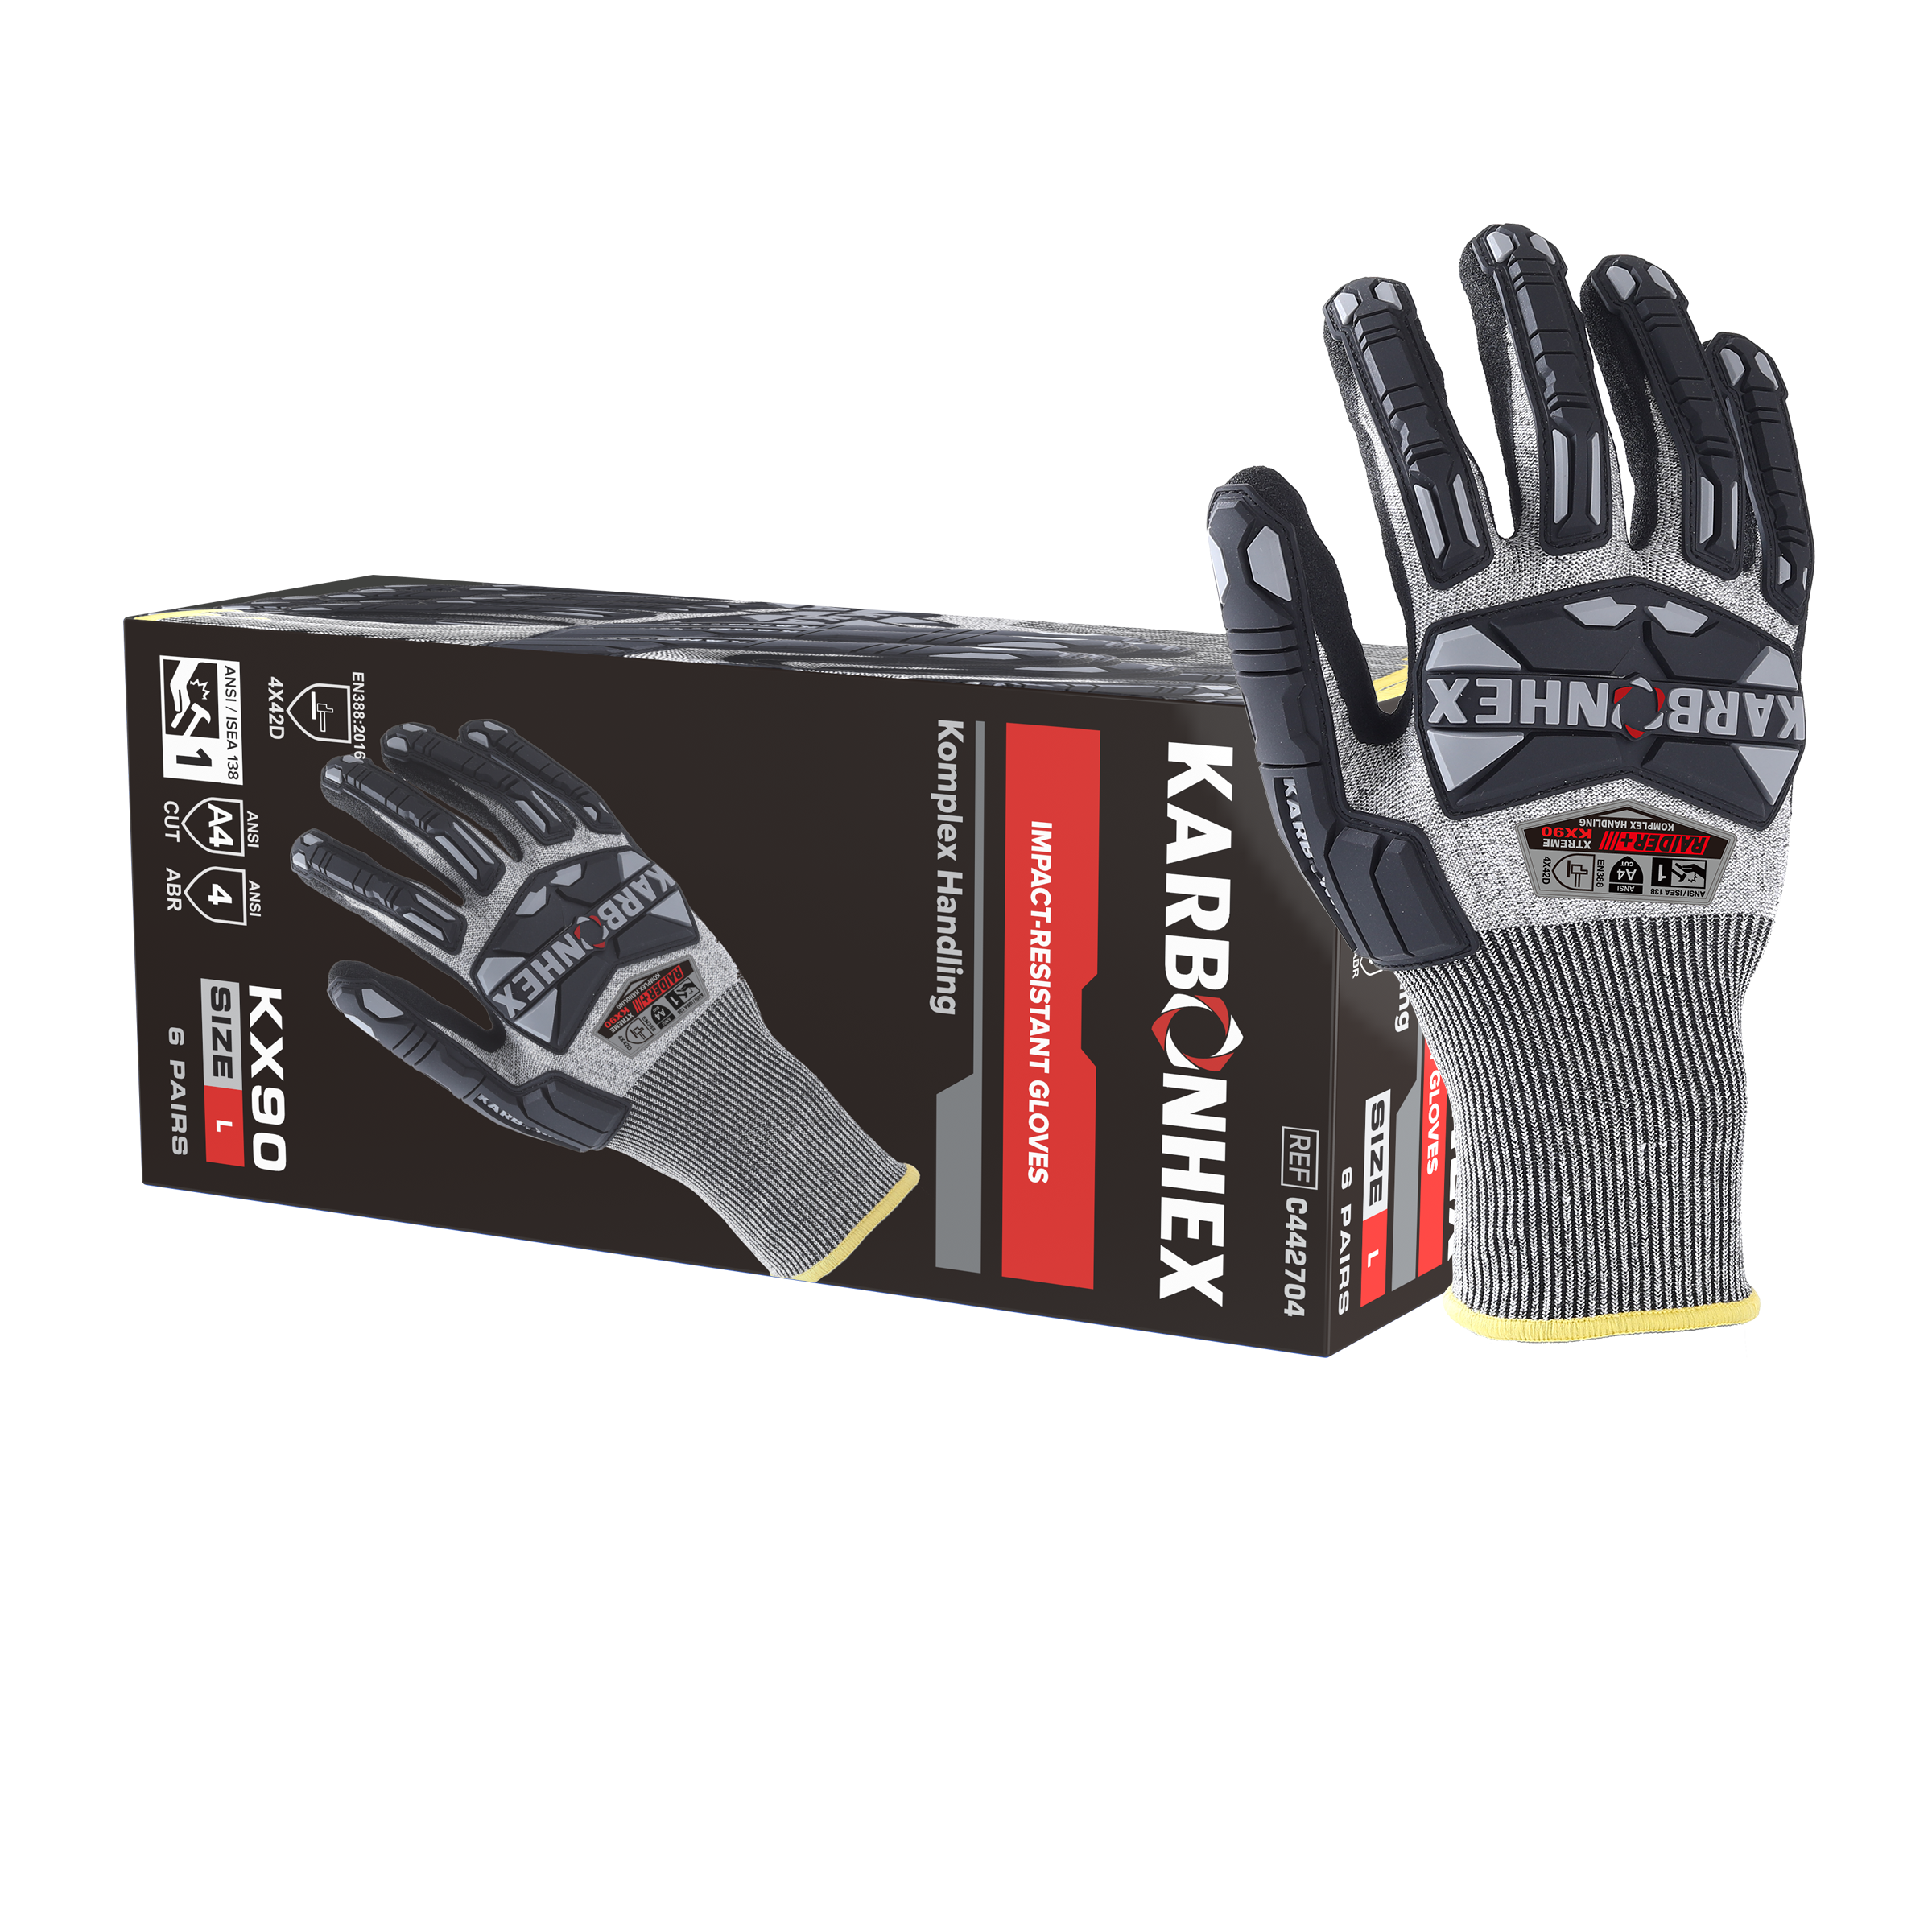 KarbonHex® KX90 by SW® Purpose Built Impact-Resistant Gloves with Nitrile Coating (6 Pairs Per Box)